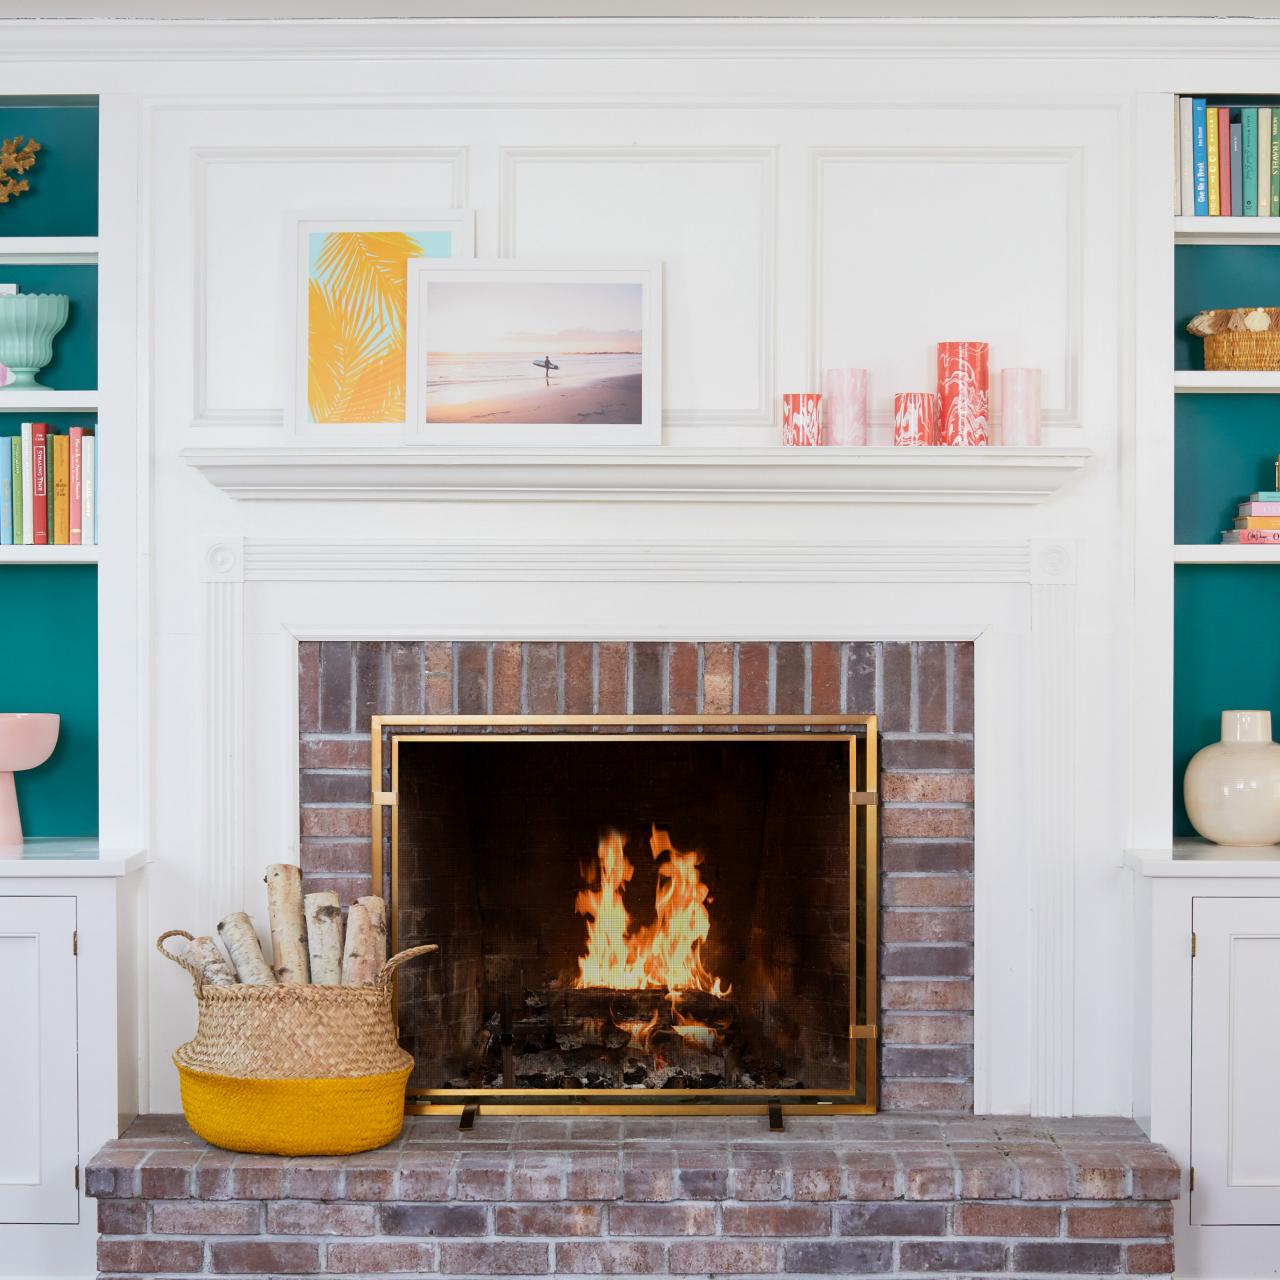 34 Clever Fireplace Built-In Ideas to Maximize Style